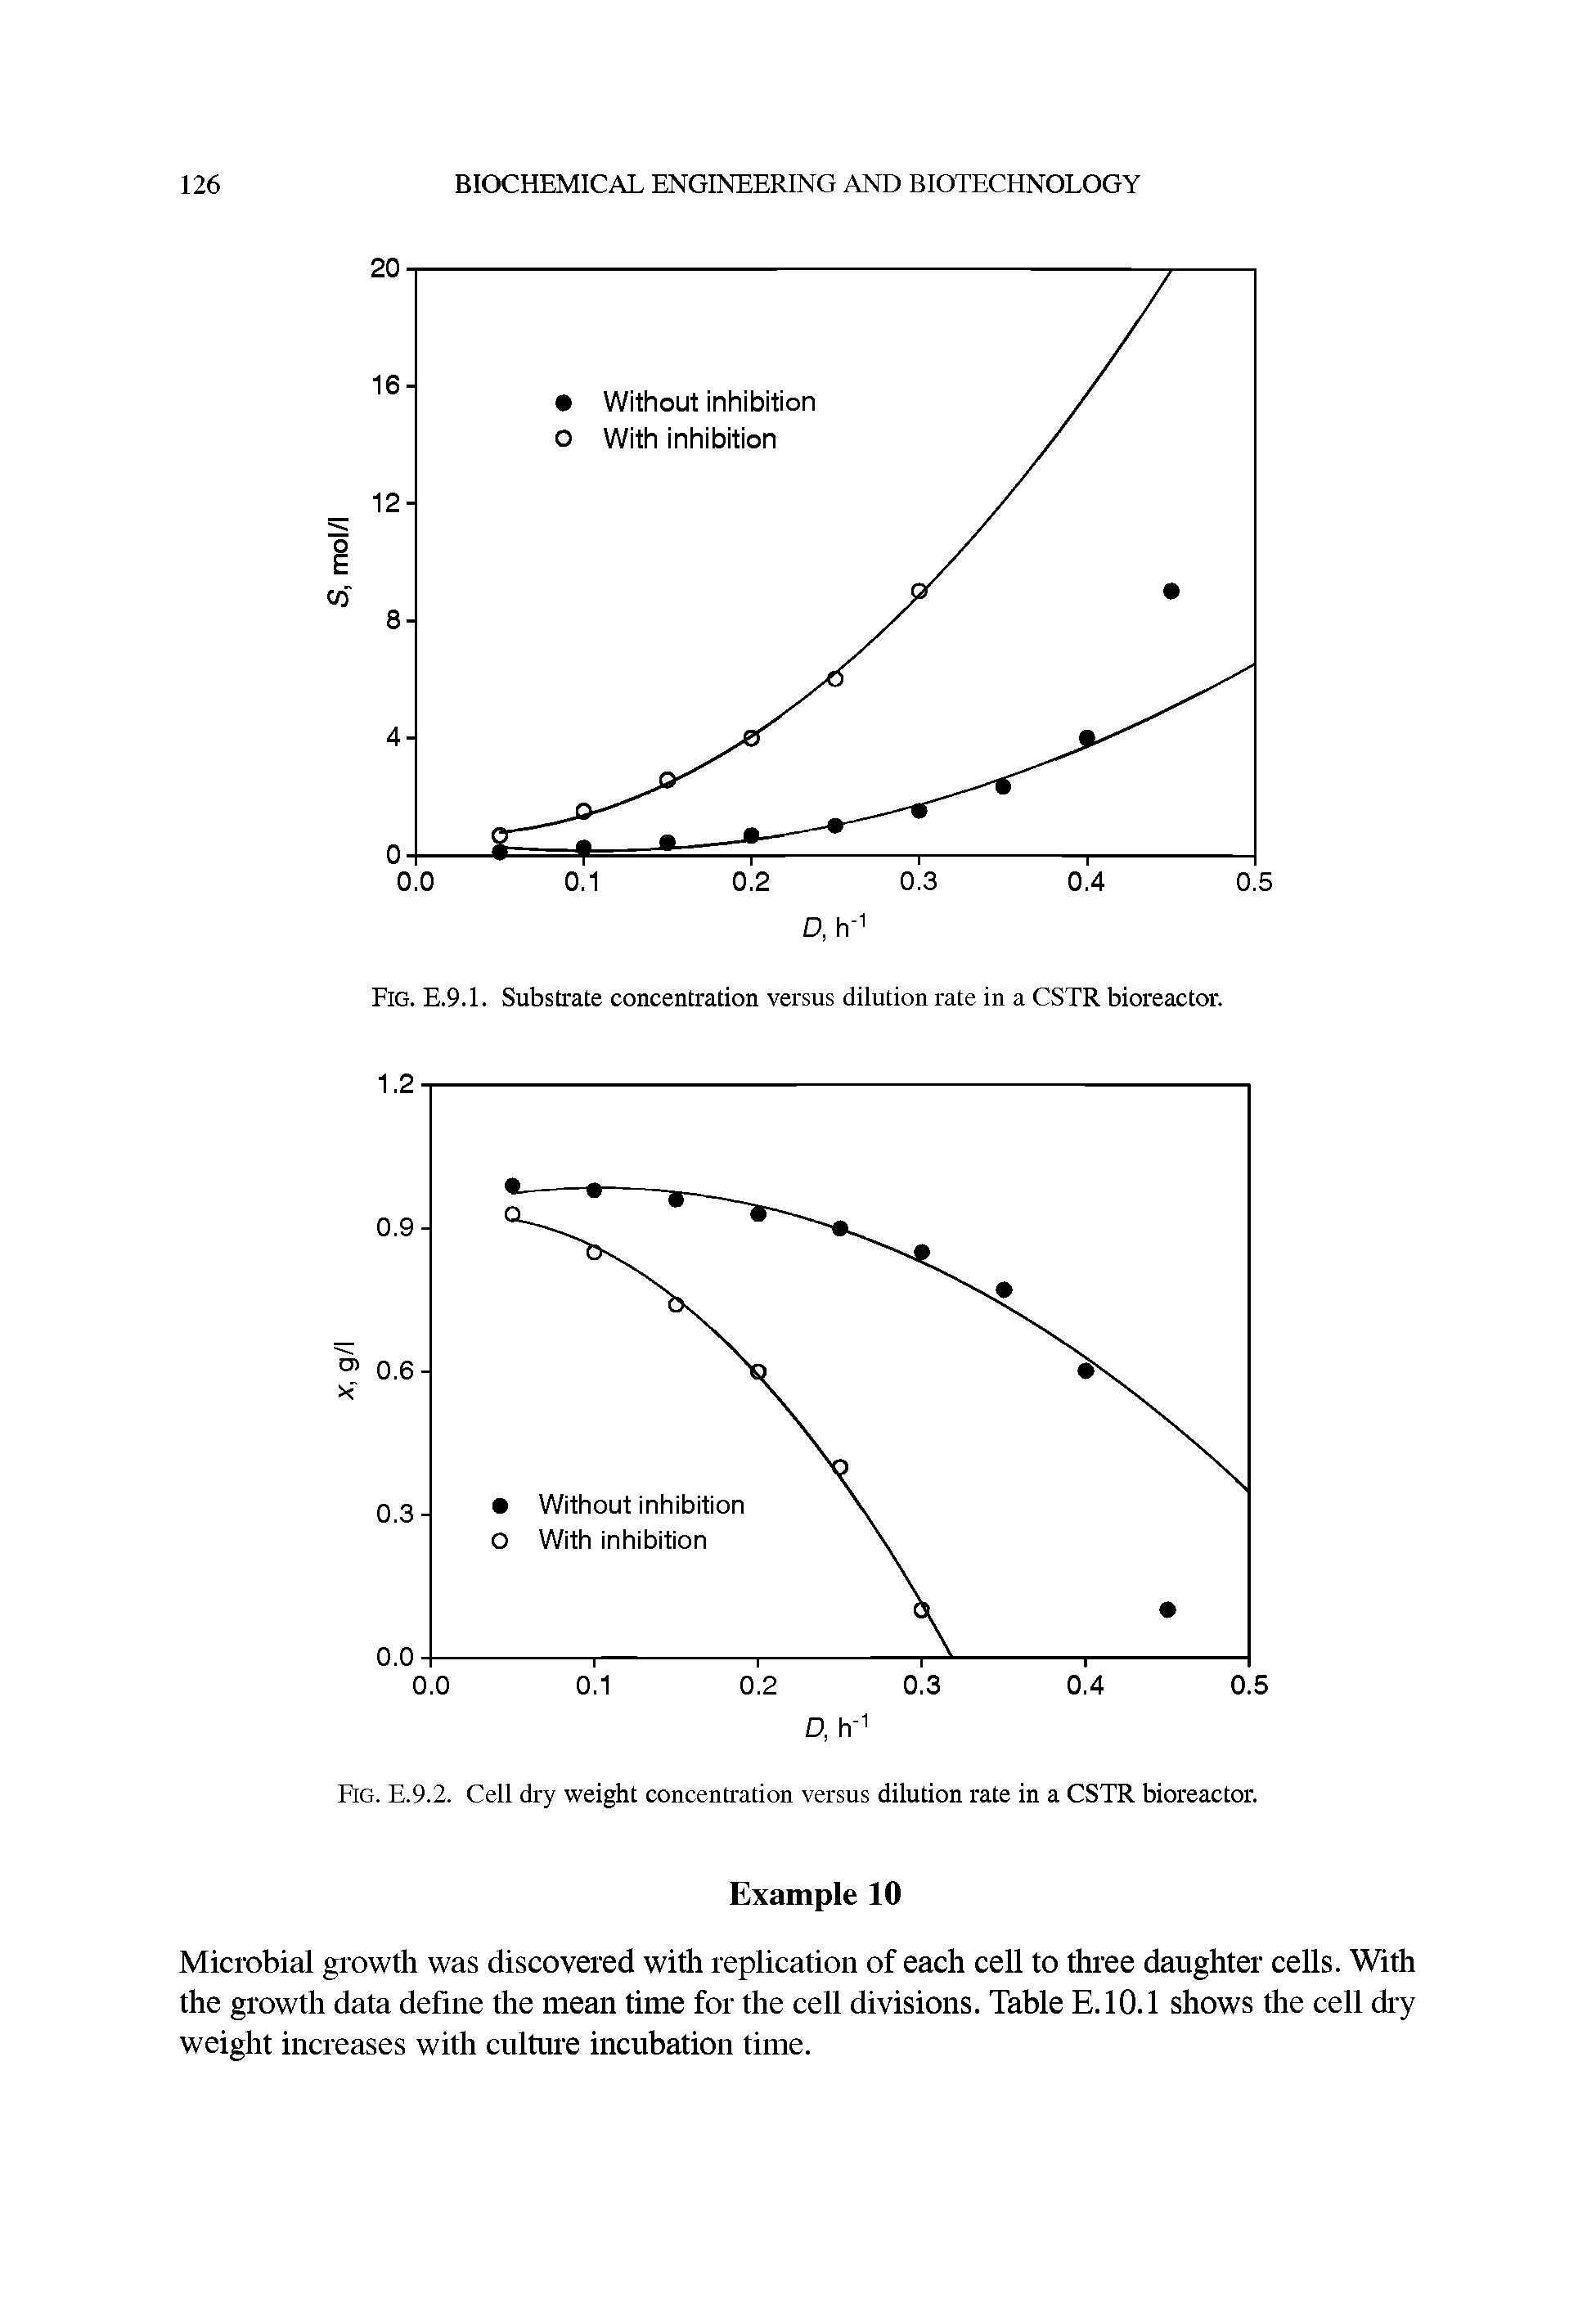 Fig. E.9.1. Substrate concentration versus dilution rate in a CSTR bioreactor.